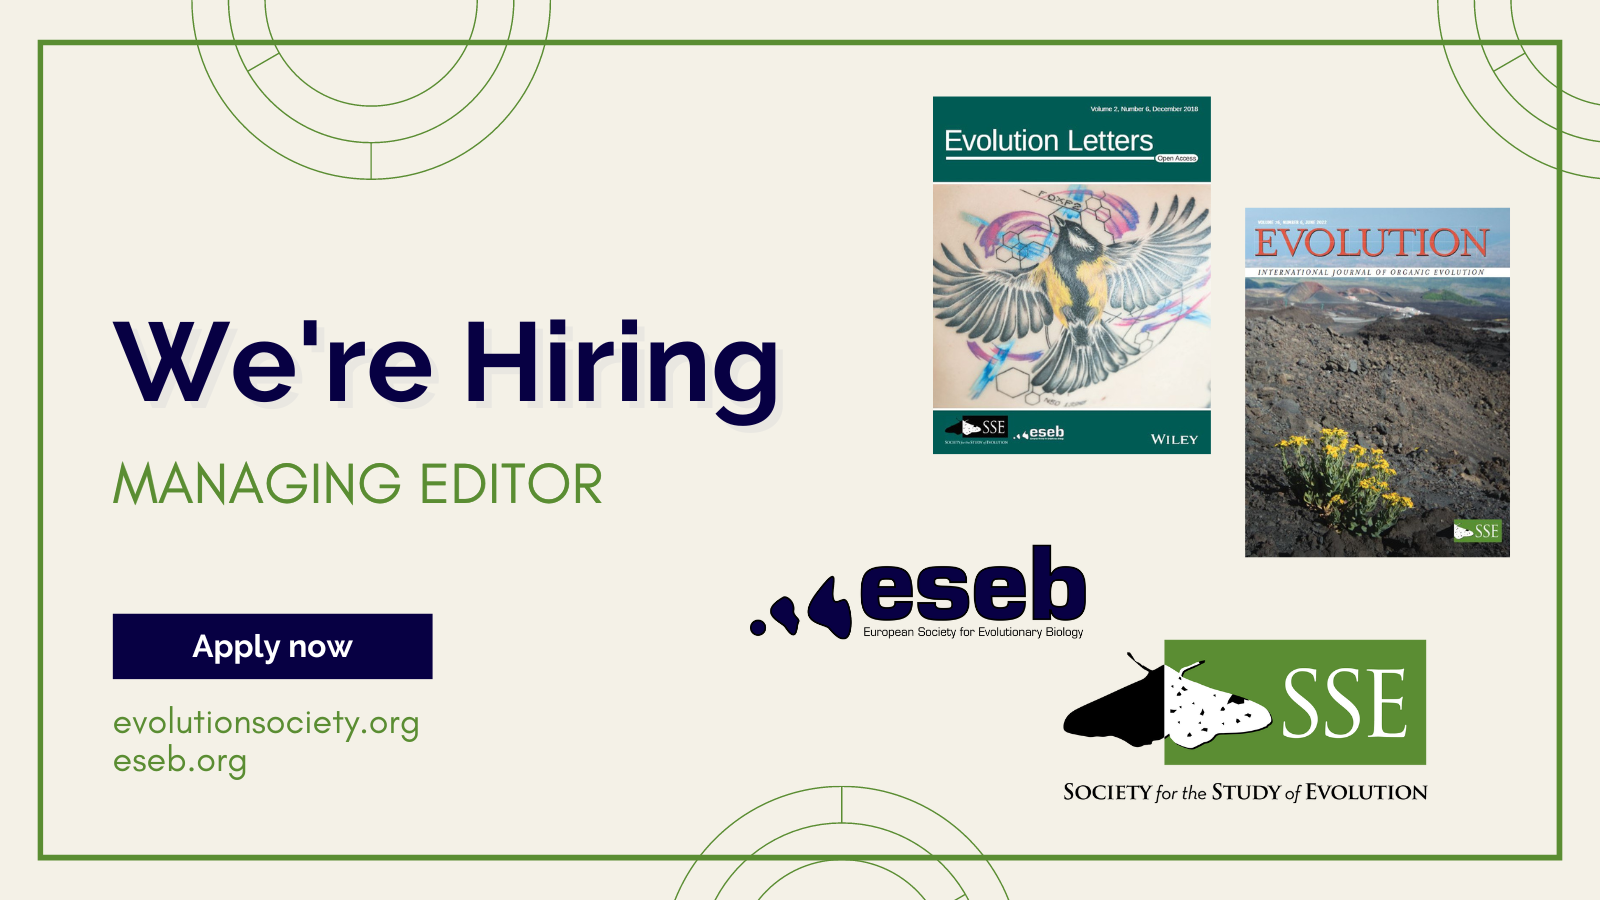 Journal covers for Evolution and Evolution Letters. Logos for the European Society for Evolutionary Biology and the Society for the Study of Evolution. Text: We're Hiring. Managing Editor. Apply now. evolutionsociety.org. eseb.org.